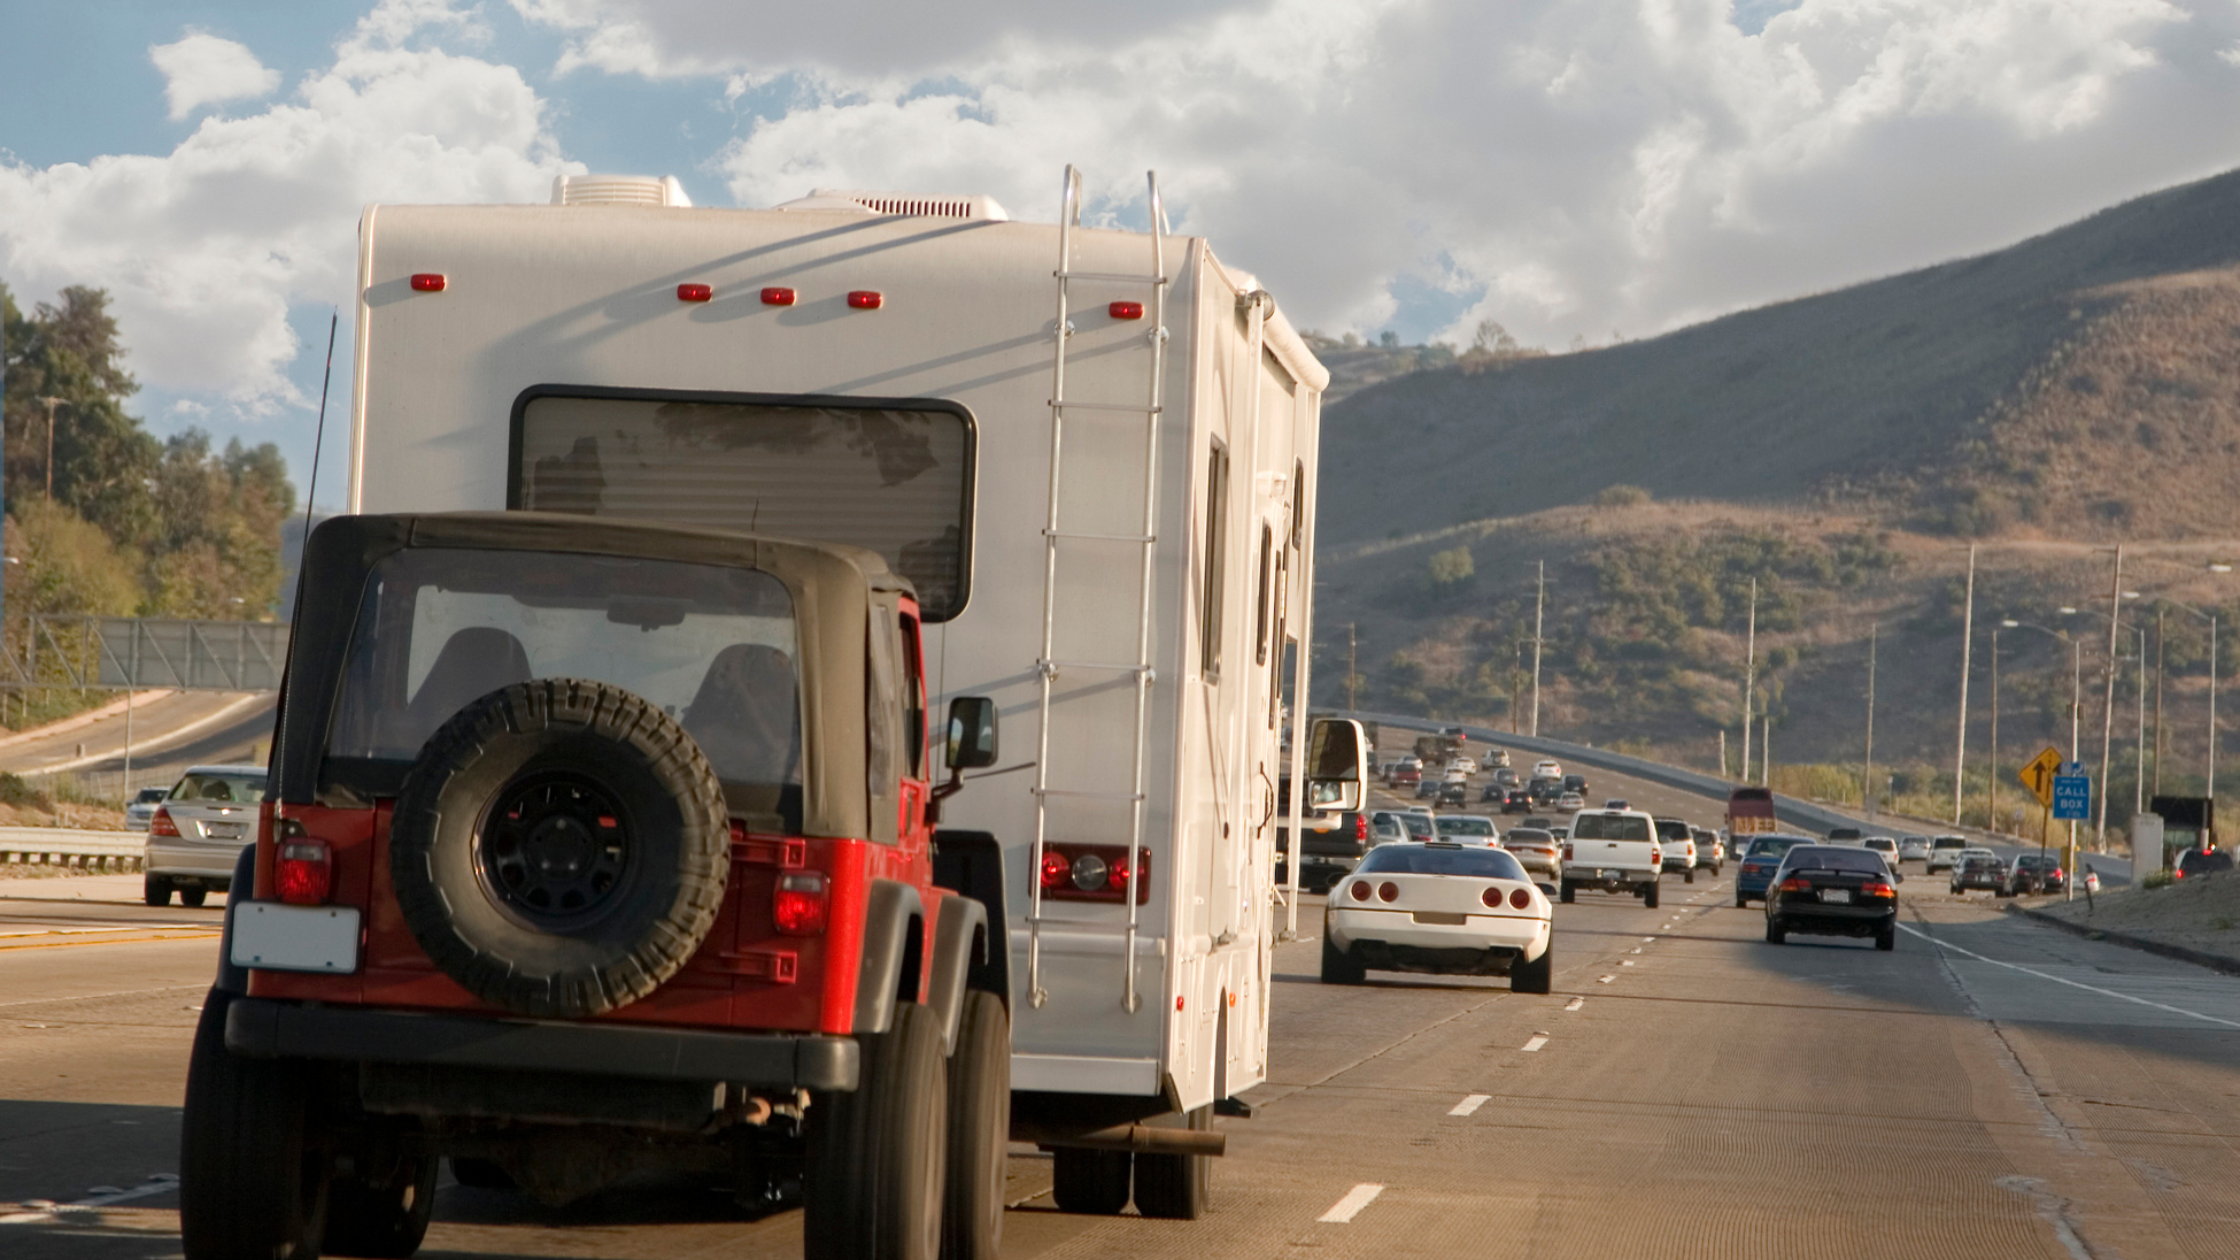 All About Towed Vehicles